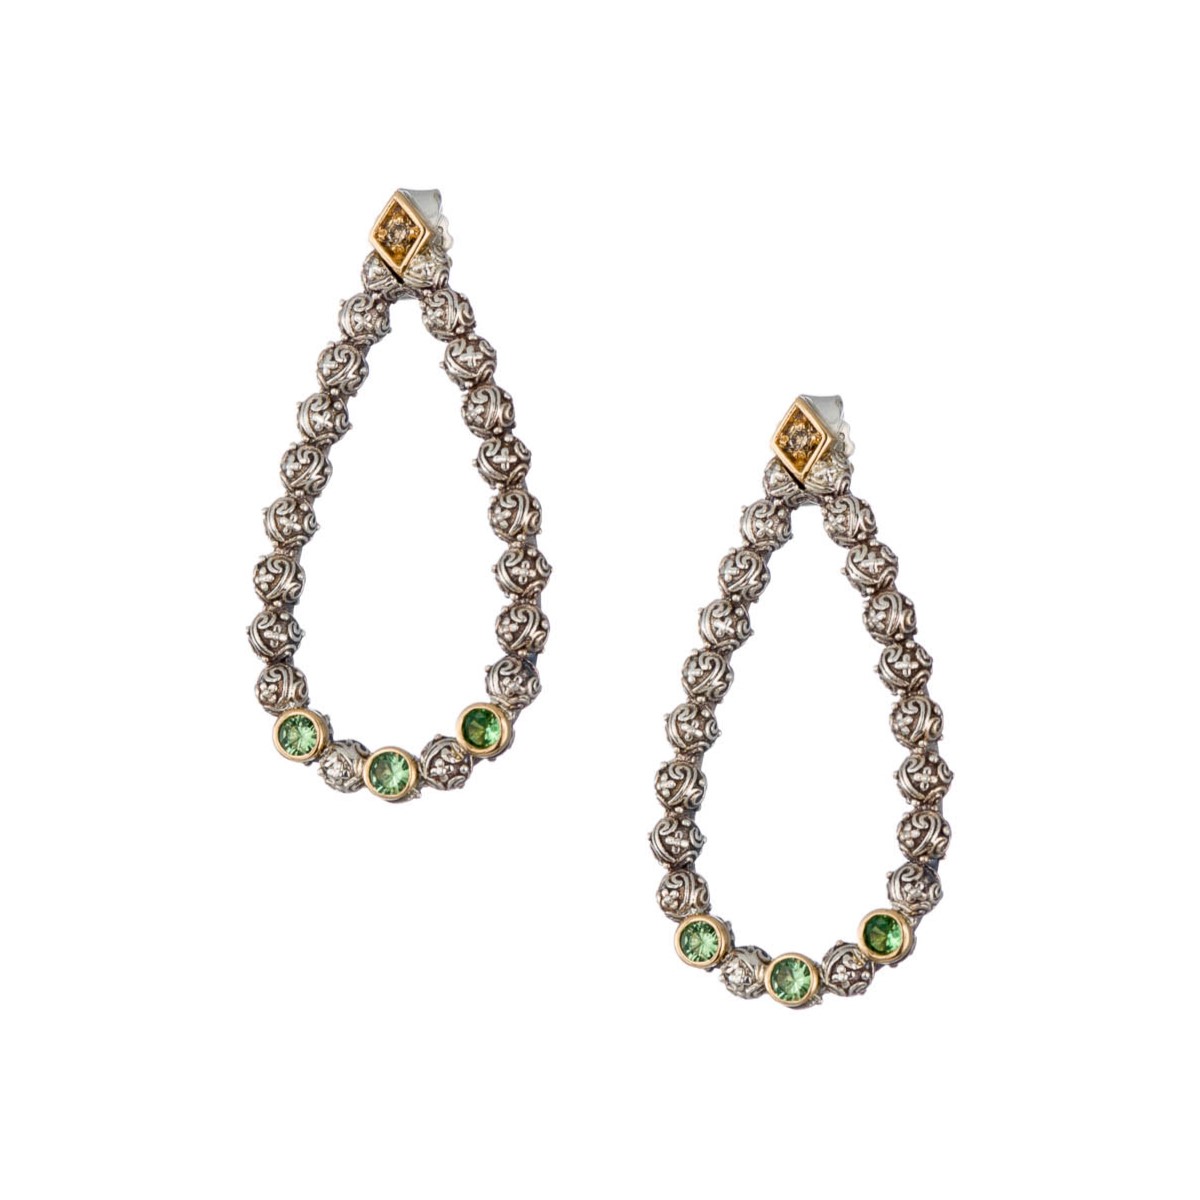 Eve stud drop Earrings in 18K Gold and Sterling Silver with gemstones